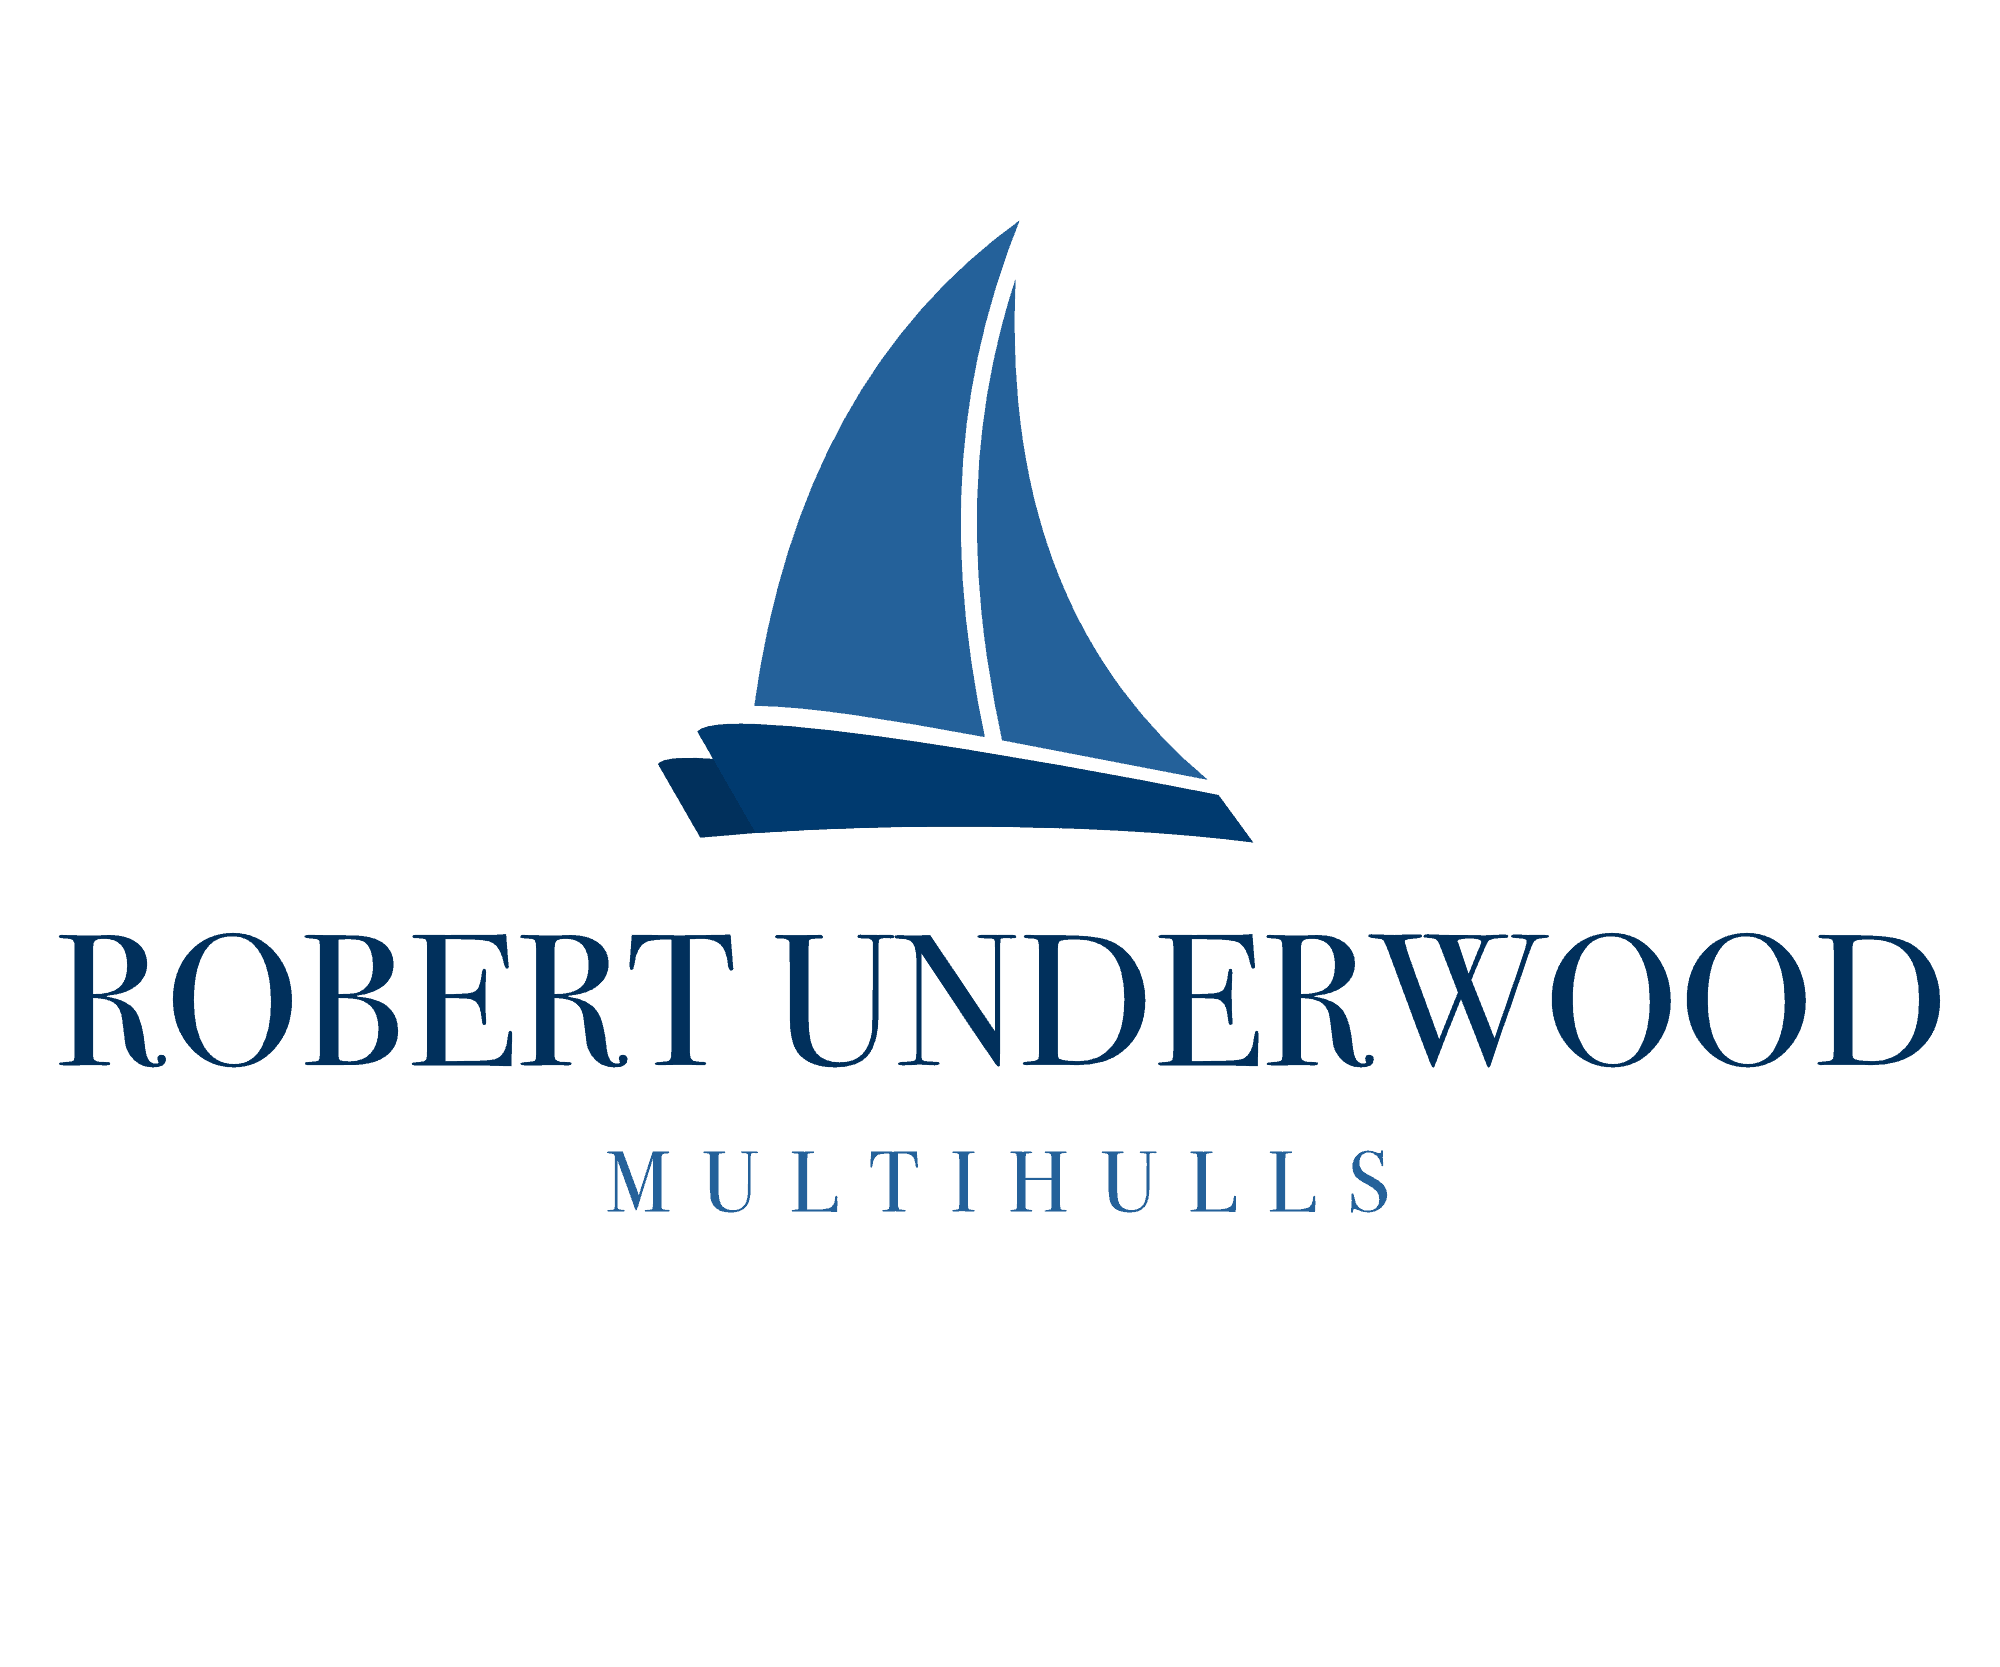 About Multicats International: Located in UK, Robert Underwood Multihulls is part of our network.